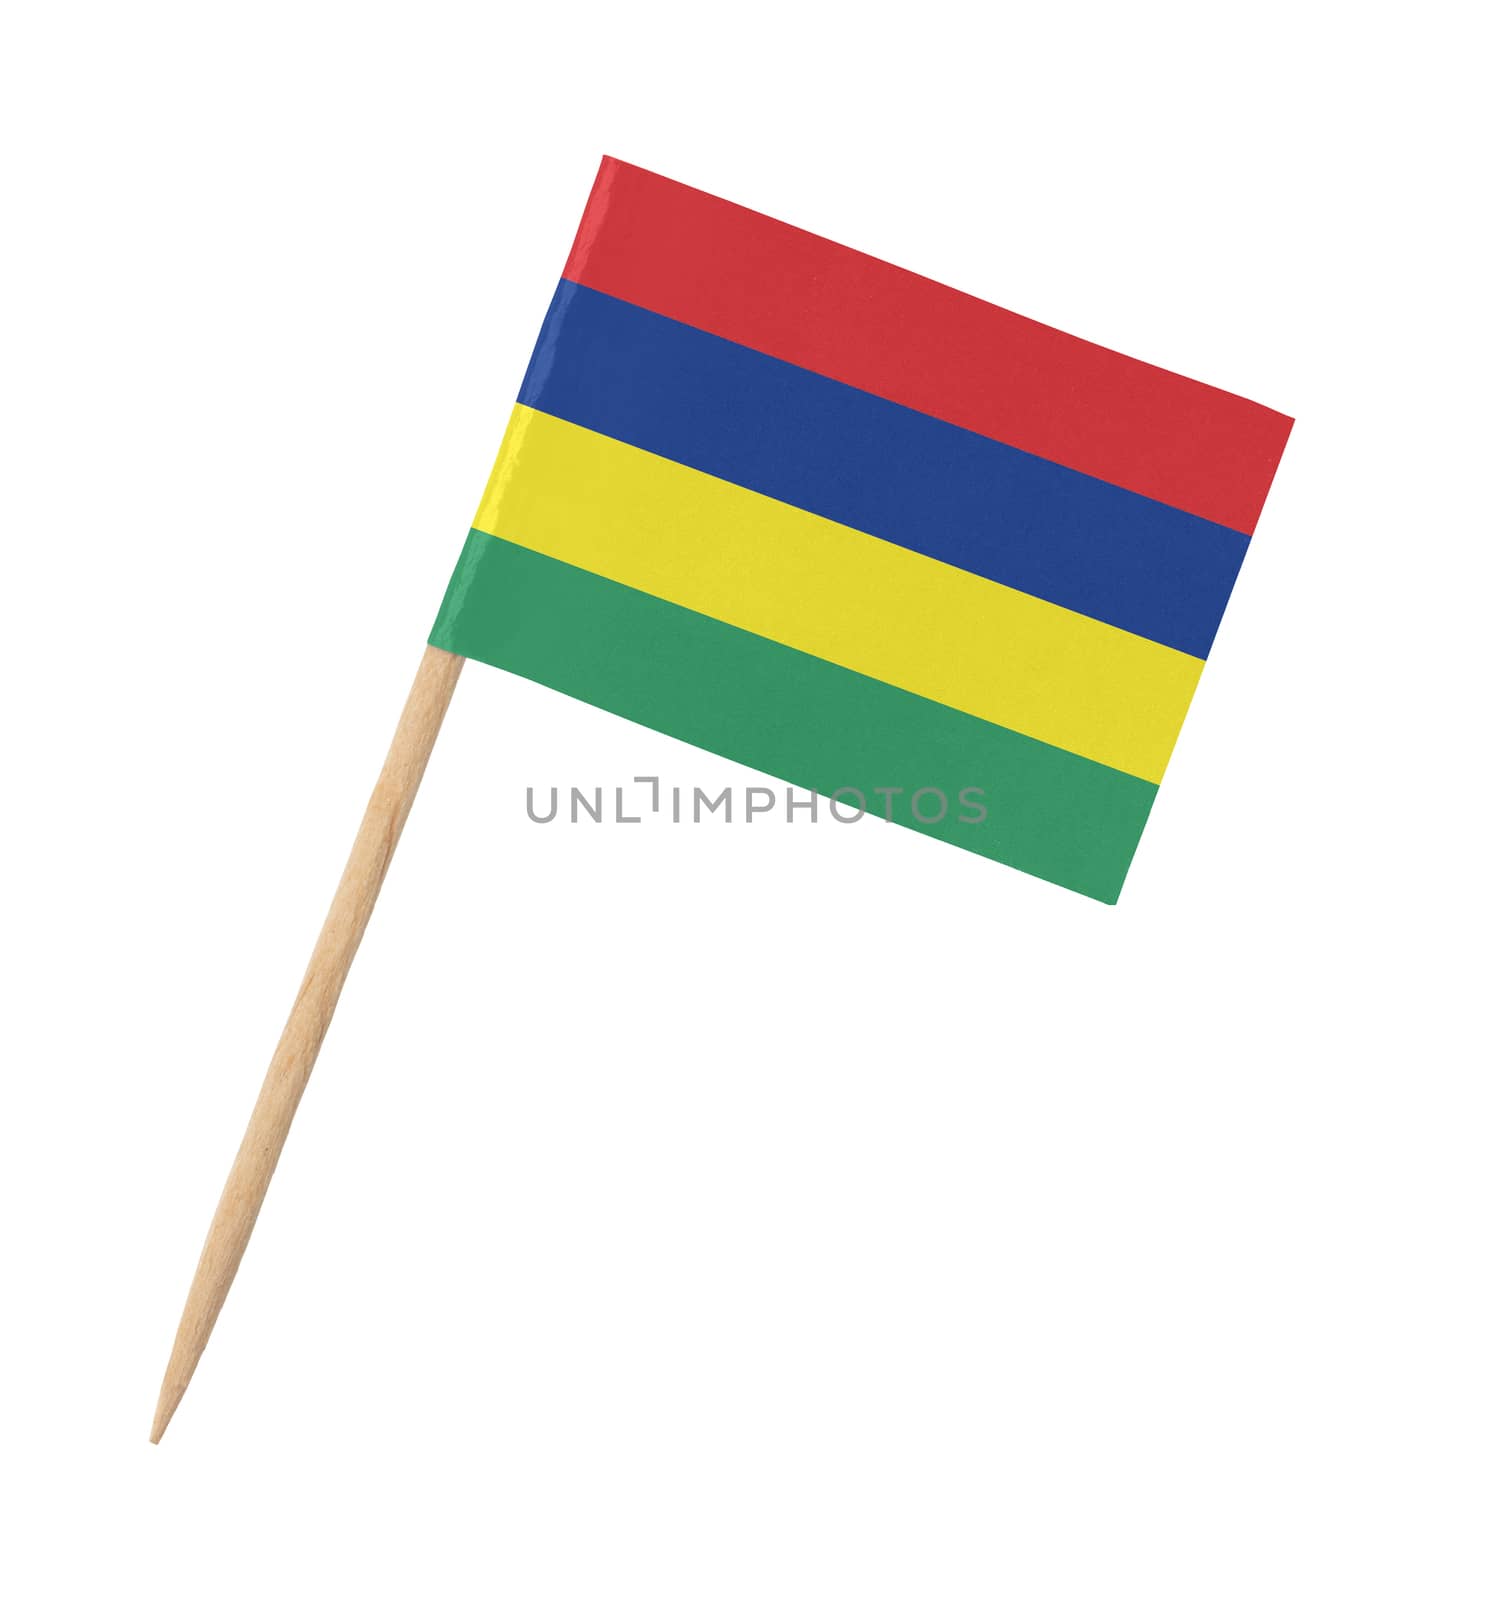 Small paper flag of Mauritius on wooden stick by michaklootwijk